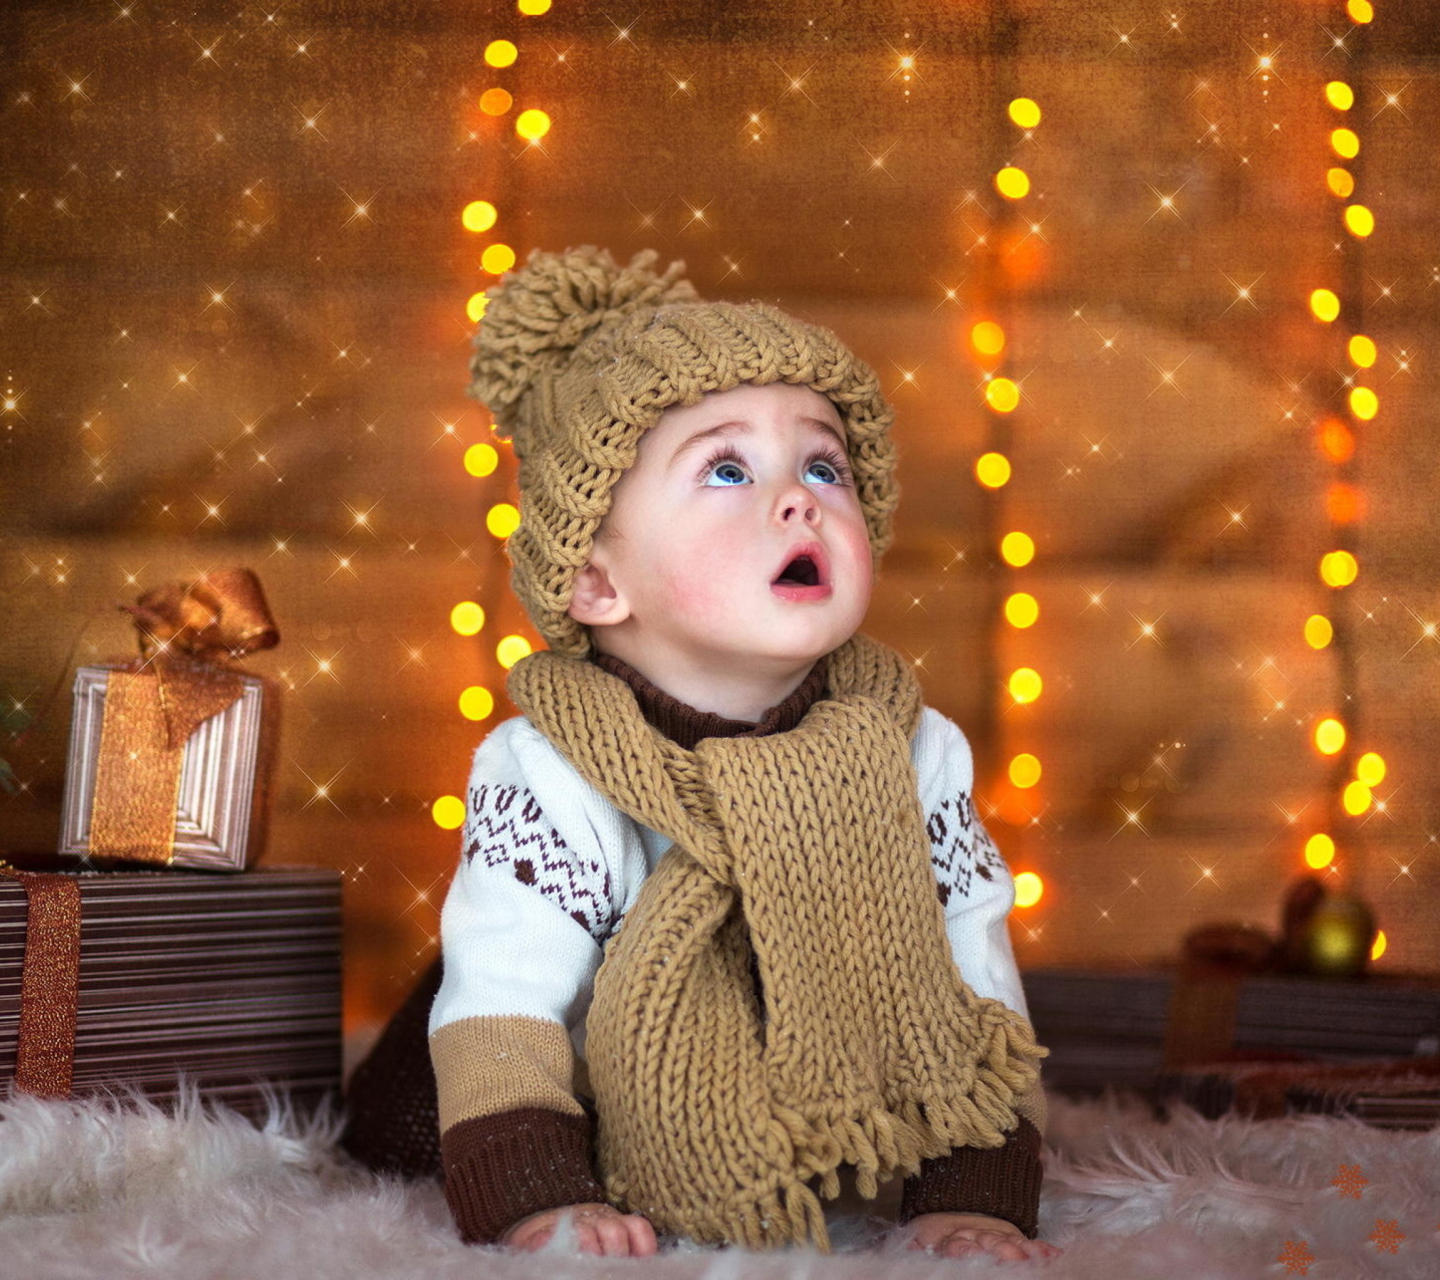 Cute Baby In Hat And Scarf screenshot #1 1440x1280